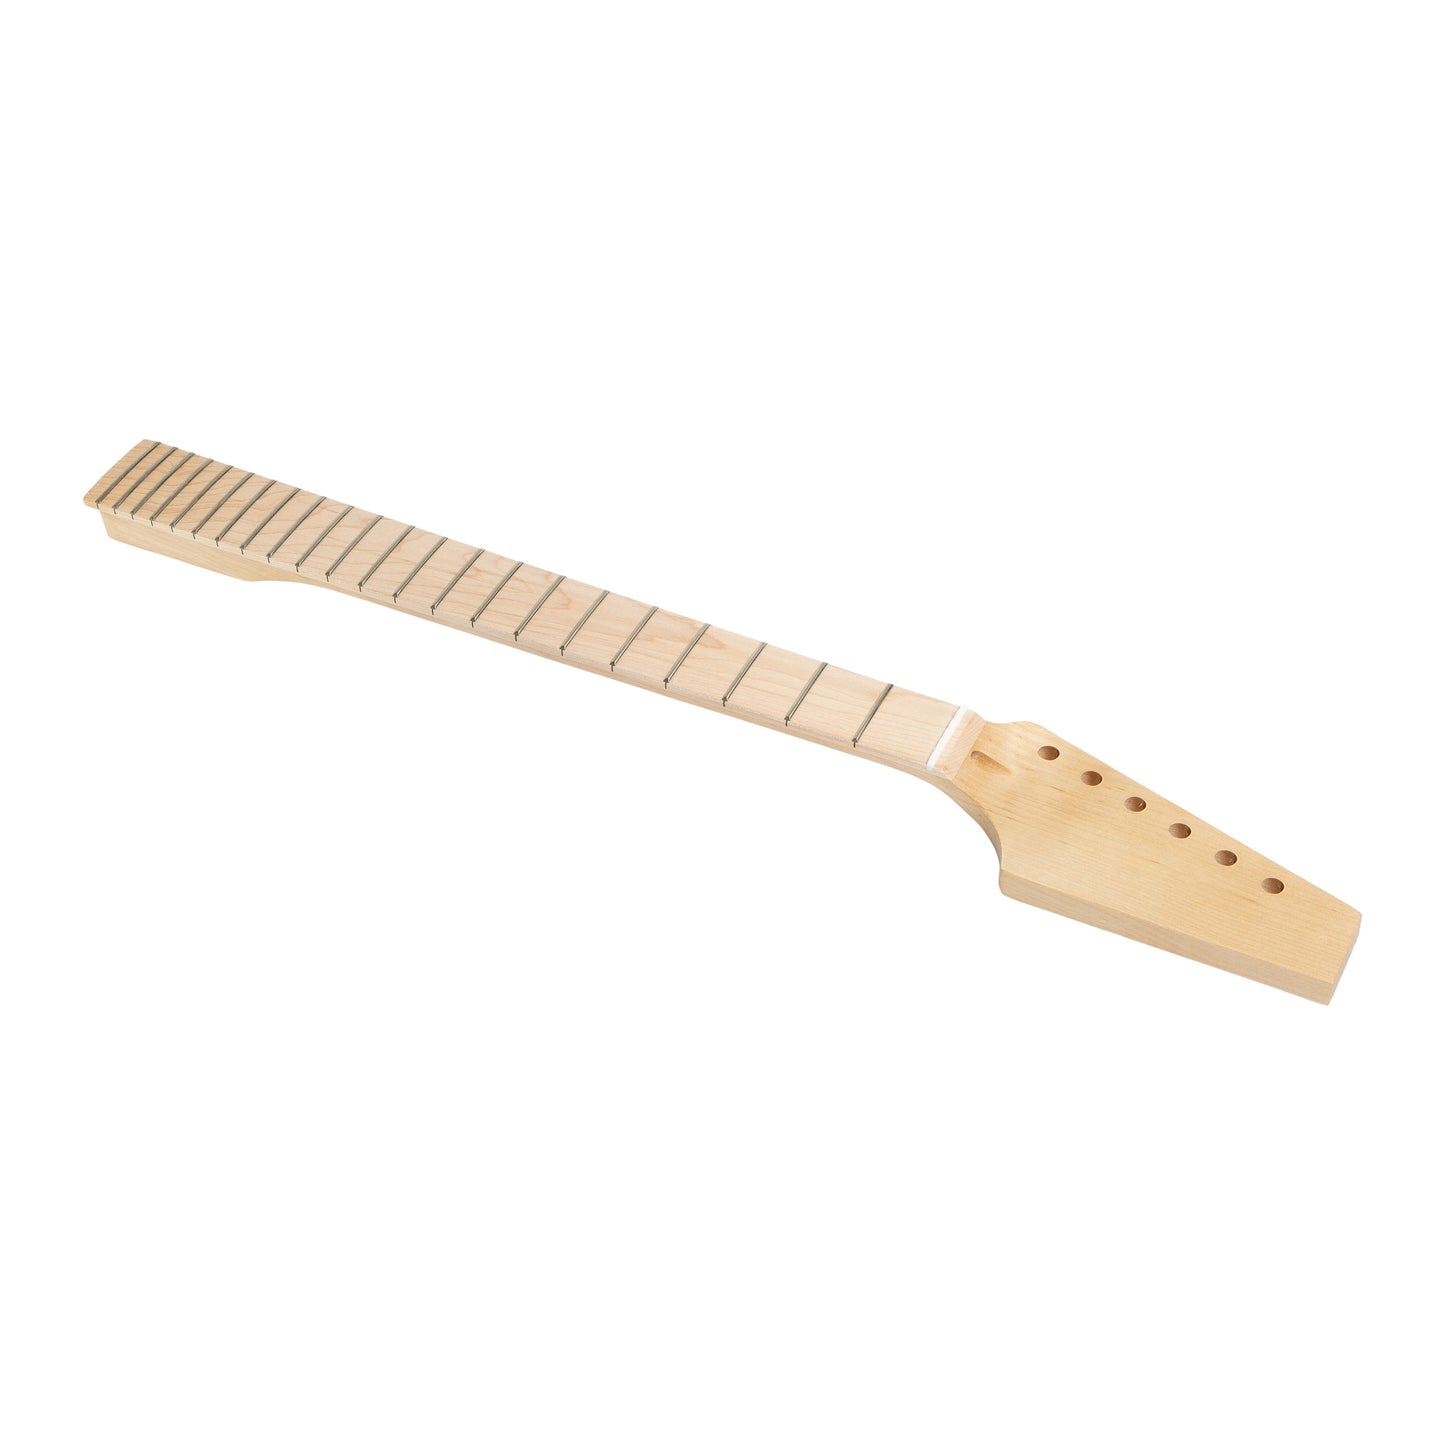 AE Guitars® T-Style Guitar Neck 22 Frets Maple No Inlay